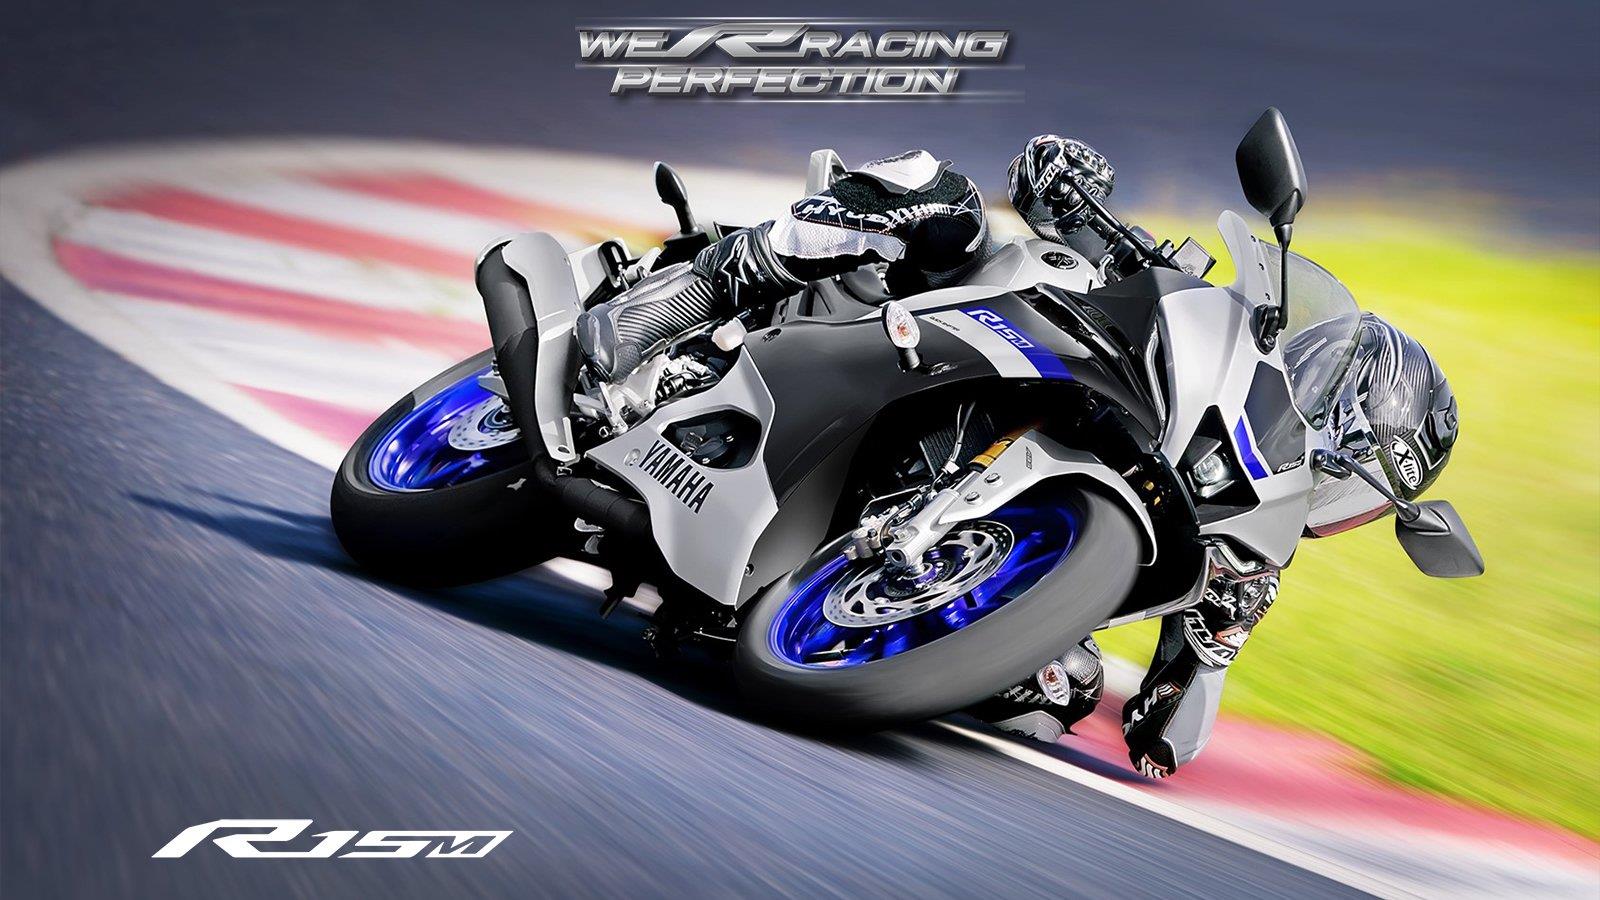 2024 Yamaha R15M Price, Specs, Top Speed & Mileage in India (New Model)